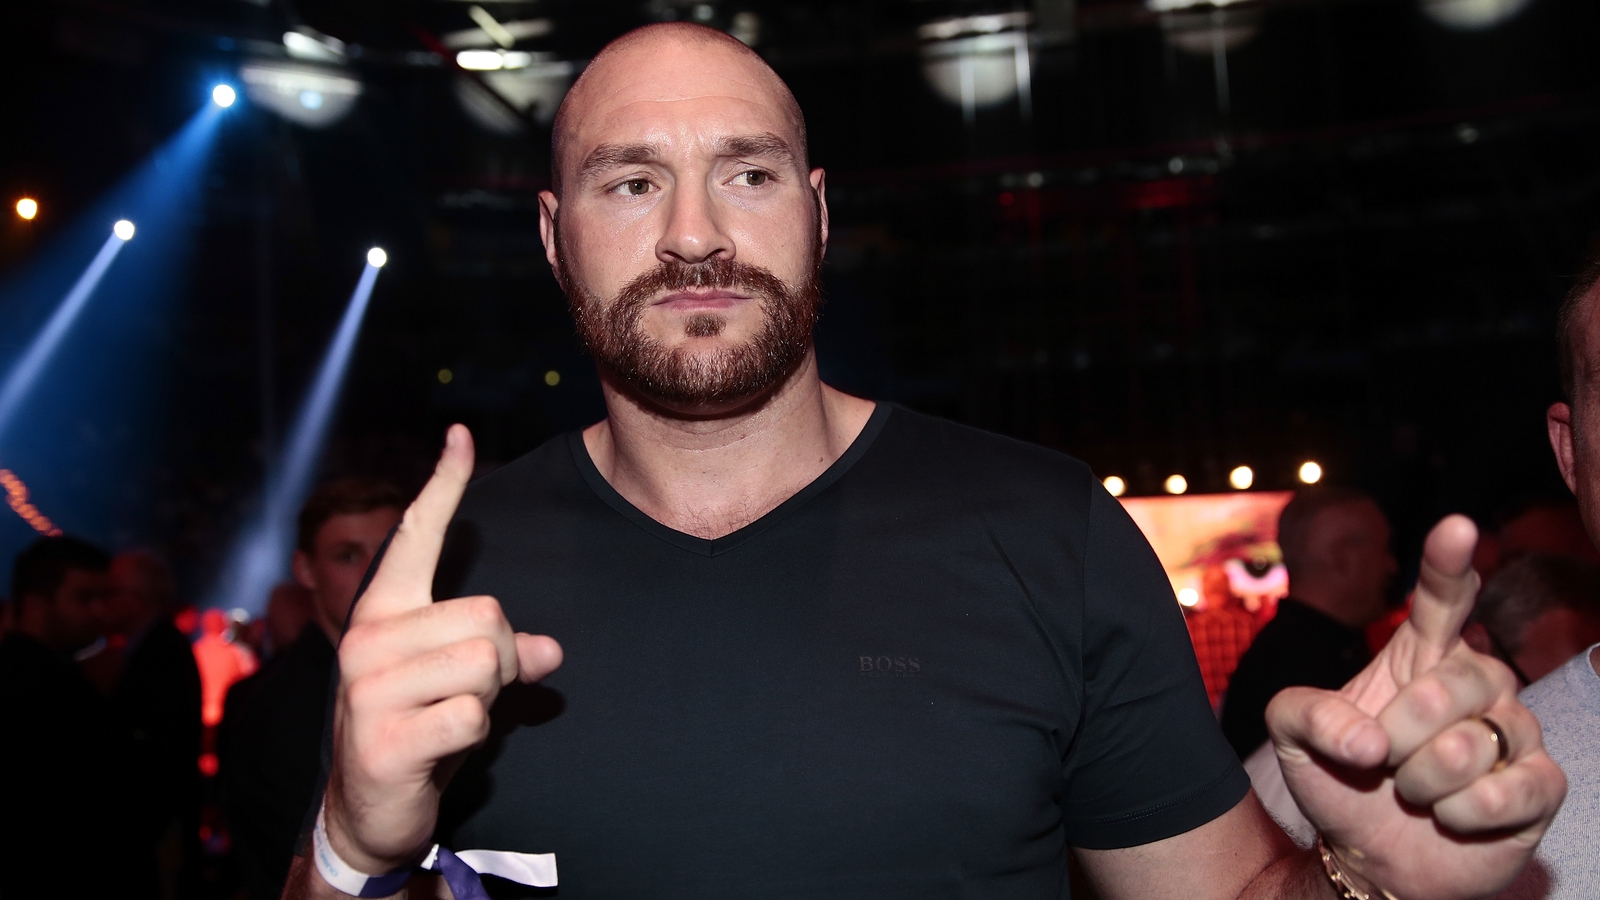 'He's back': Tyson Fury confirms comeback fight in June